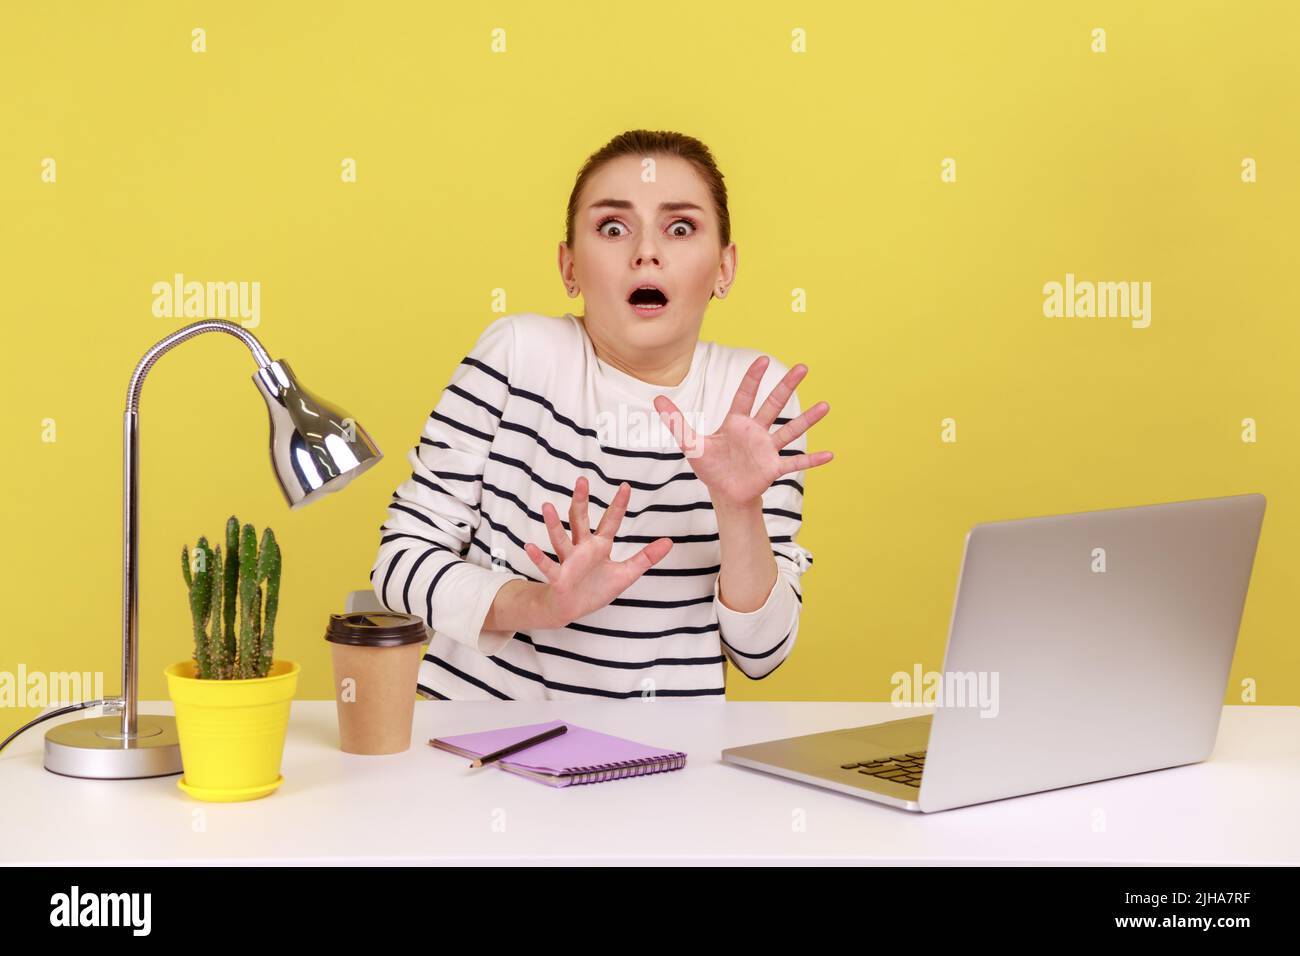 Frightened woman with shocked expression raising hands in stop gesture, defending herself, freaked out of troubles working on laptop. Indoor studio studio shot isolated on yellow background. Stock Photo